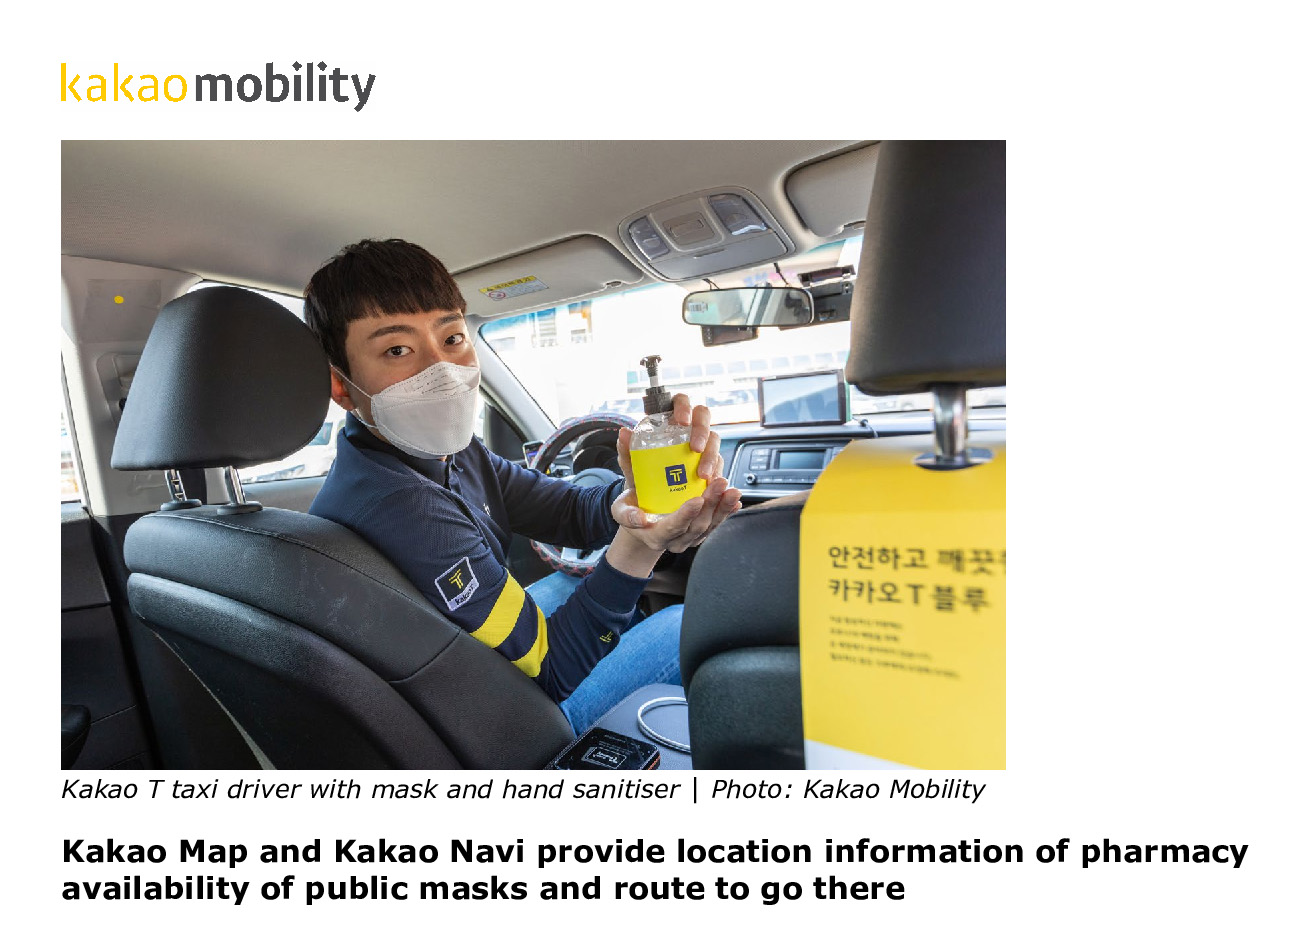 OECD hails Incheon airport, Kakao Mobility for COVID-19 responses